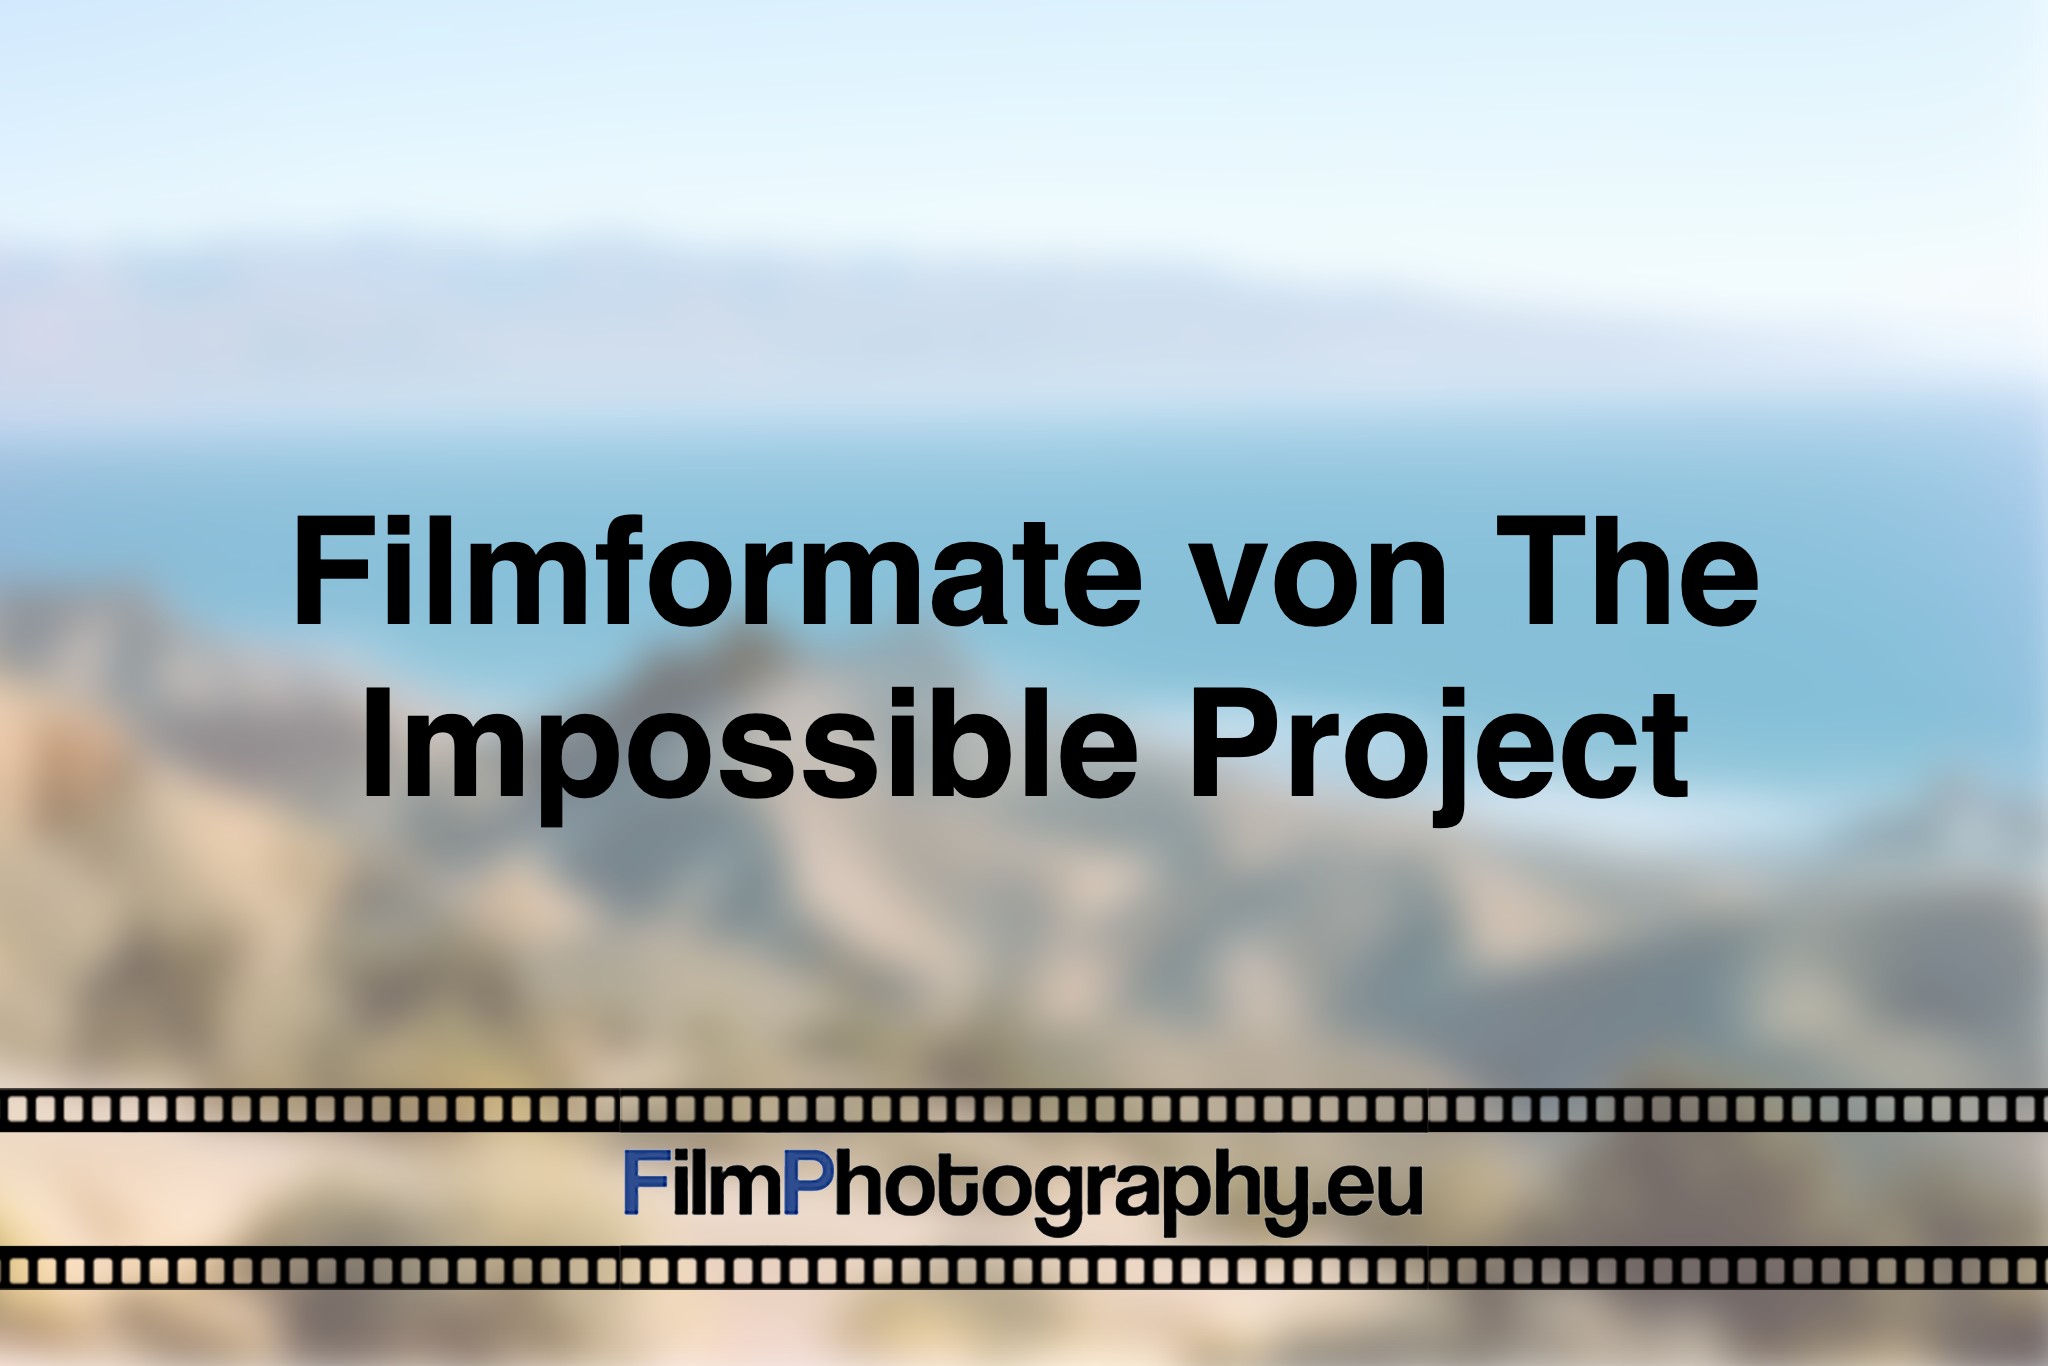 filmformate-von-the-impossible-project-photo-bnv